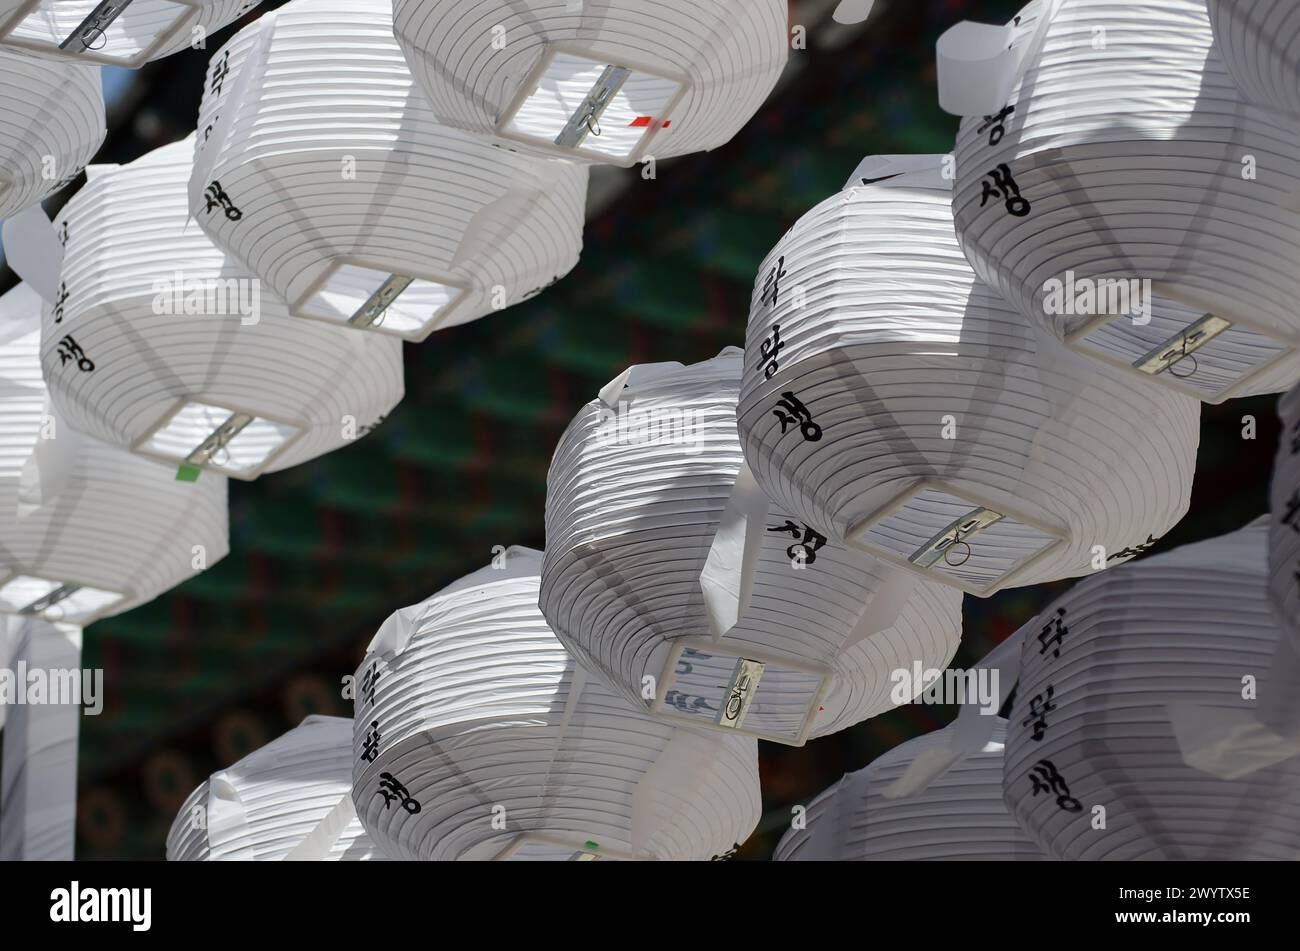 A row of lanterns with Chinese writing on them. The lanterns are white and are hanging from a building Stock Photo